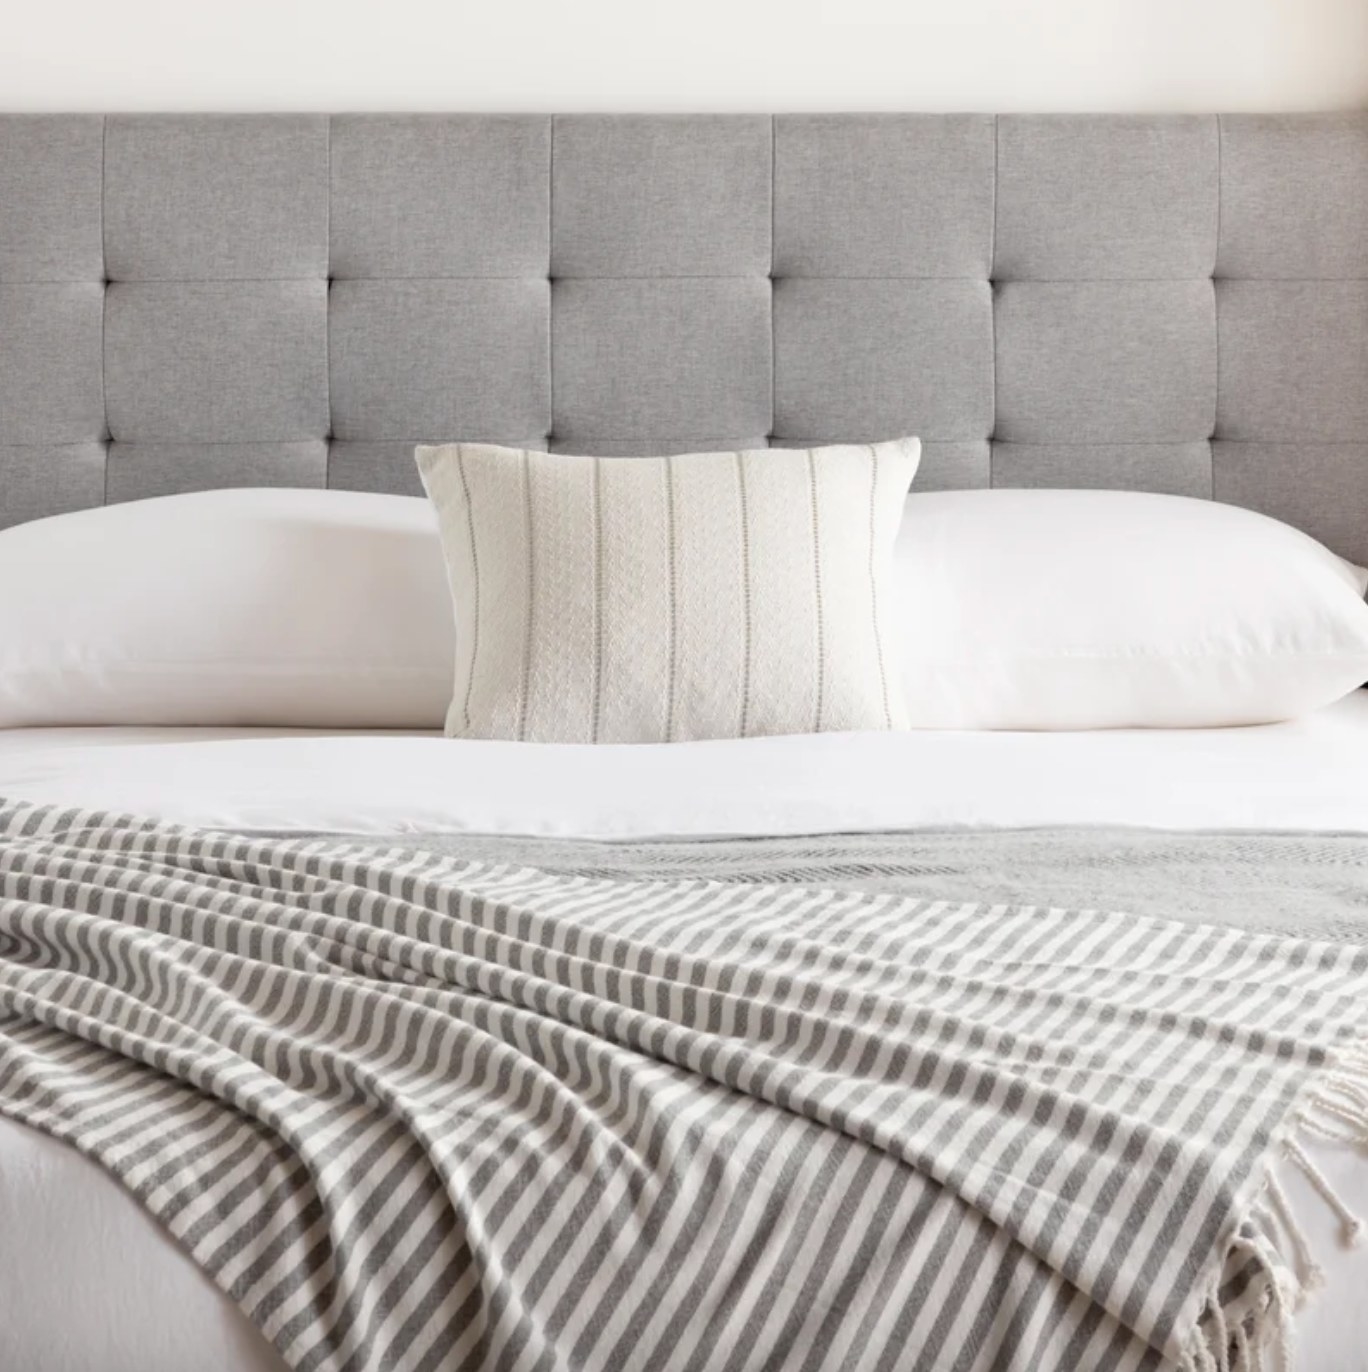 The upholstered headboard in stone